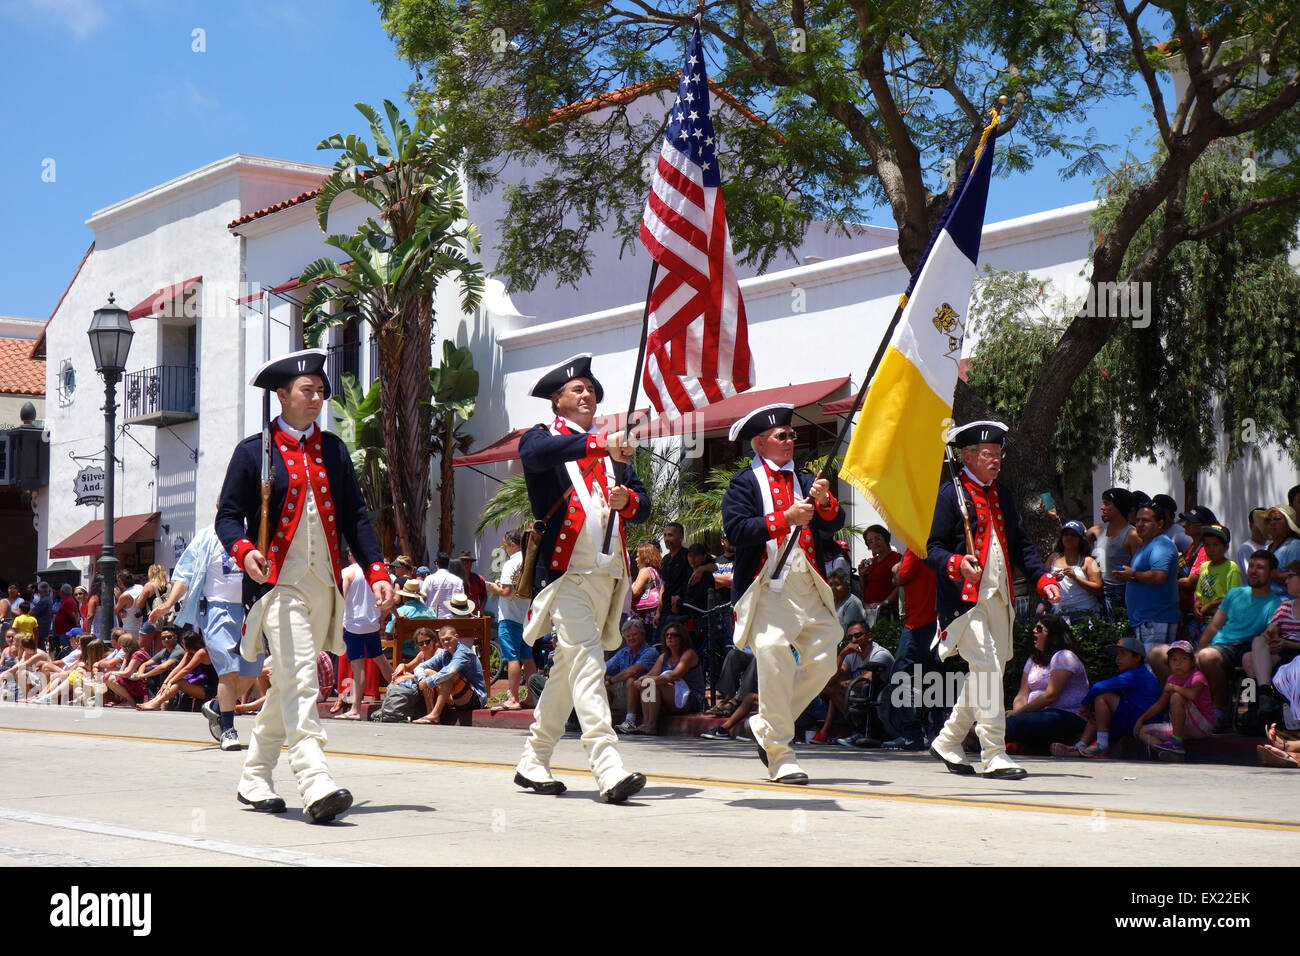 Santa Barbara, California, USA. 4th of July, 2015. Descendants who can trace their roots to soldiers in the American Revolutionary War march in an Independence Day 'Spirit of '76' parade. Credit: Lisa Werner/Alamy Live News Stock Photo